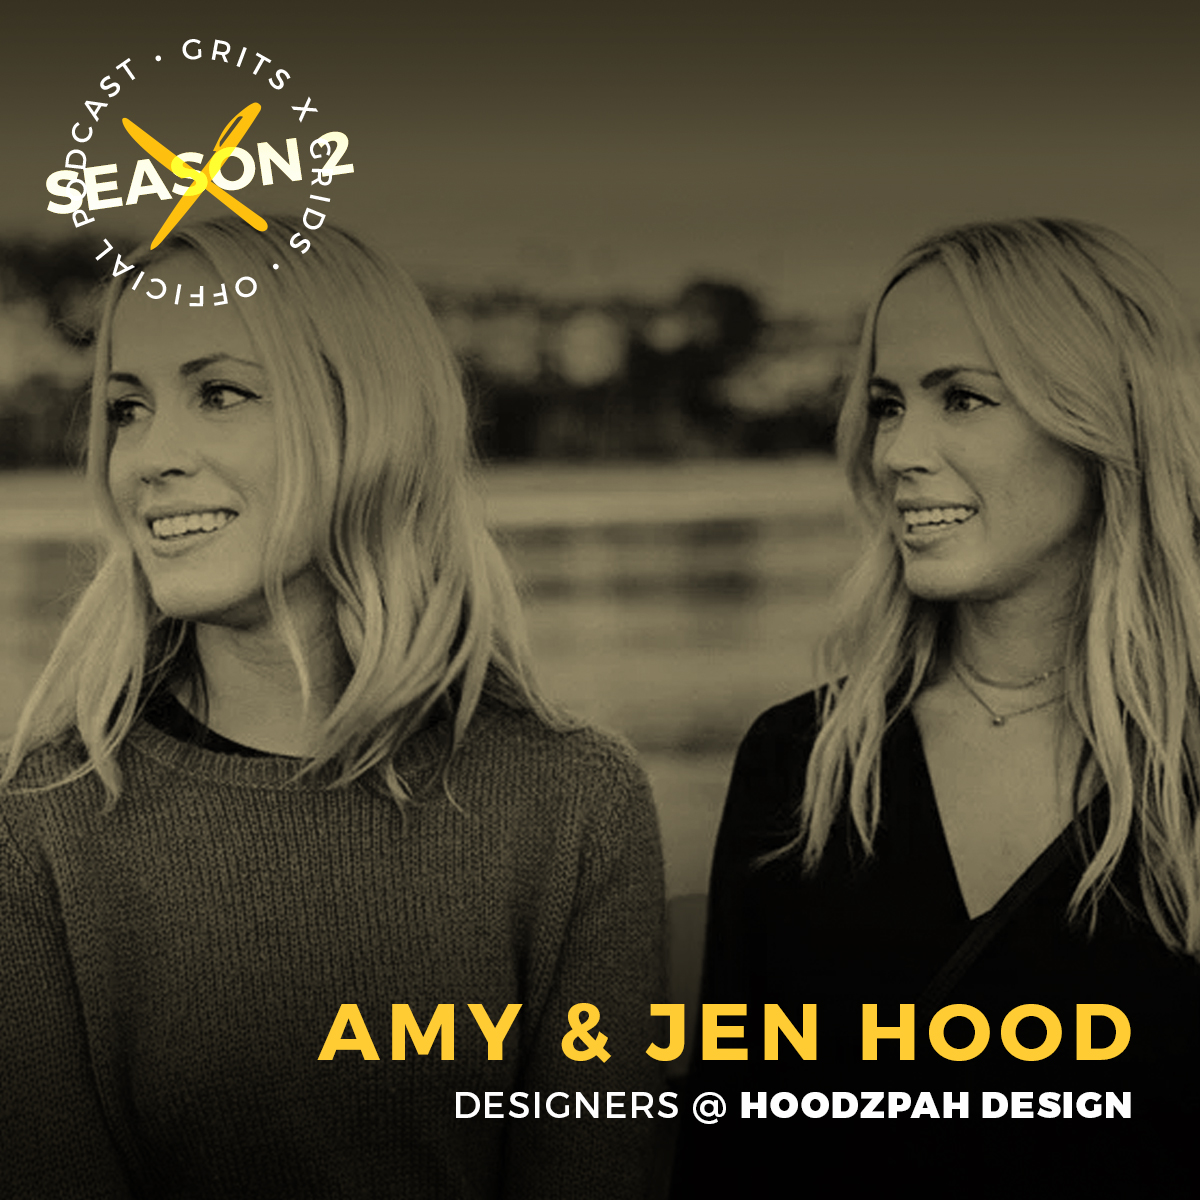 Podcast interview with Jen and Amy Hood of Hoodzpah Design and Odds and Sods